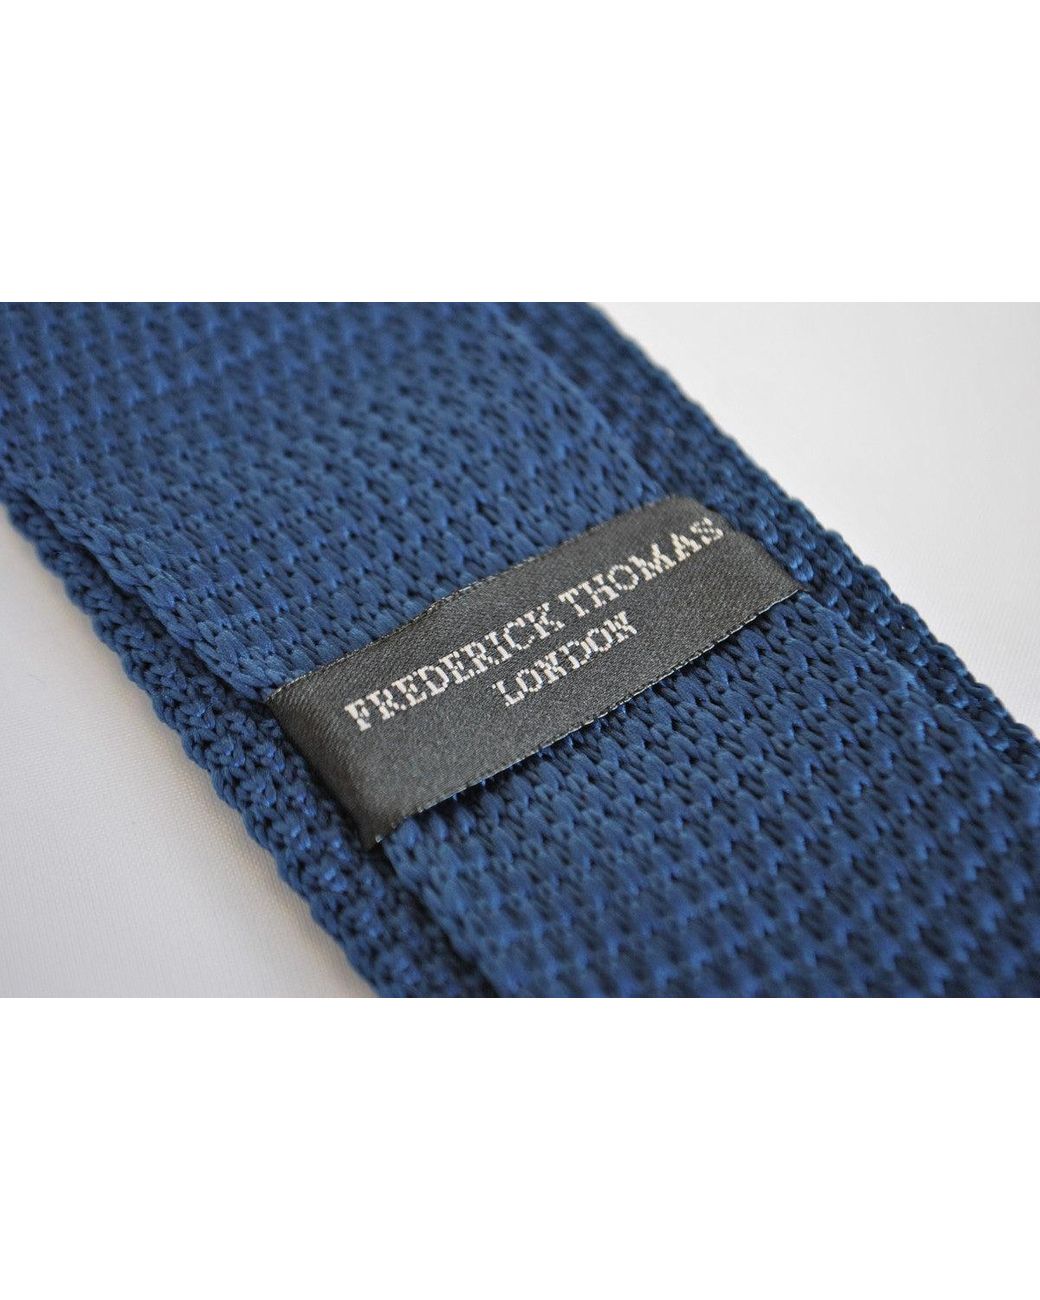 Frederick Thomas navy blue skinny knitted tie with ivory cream tip FT2023 